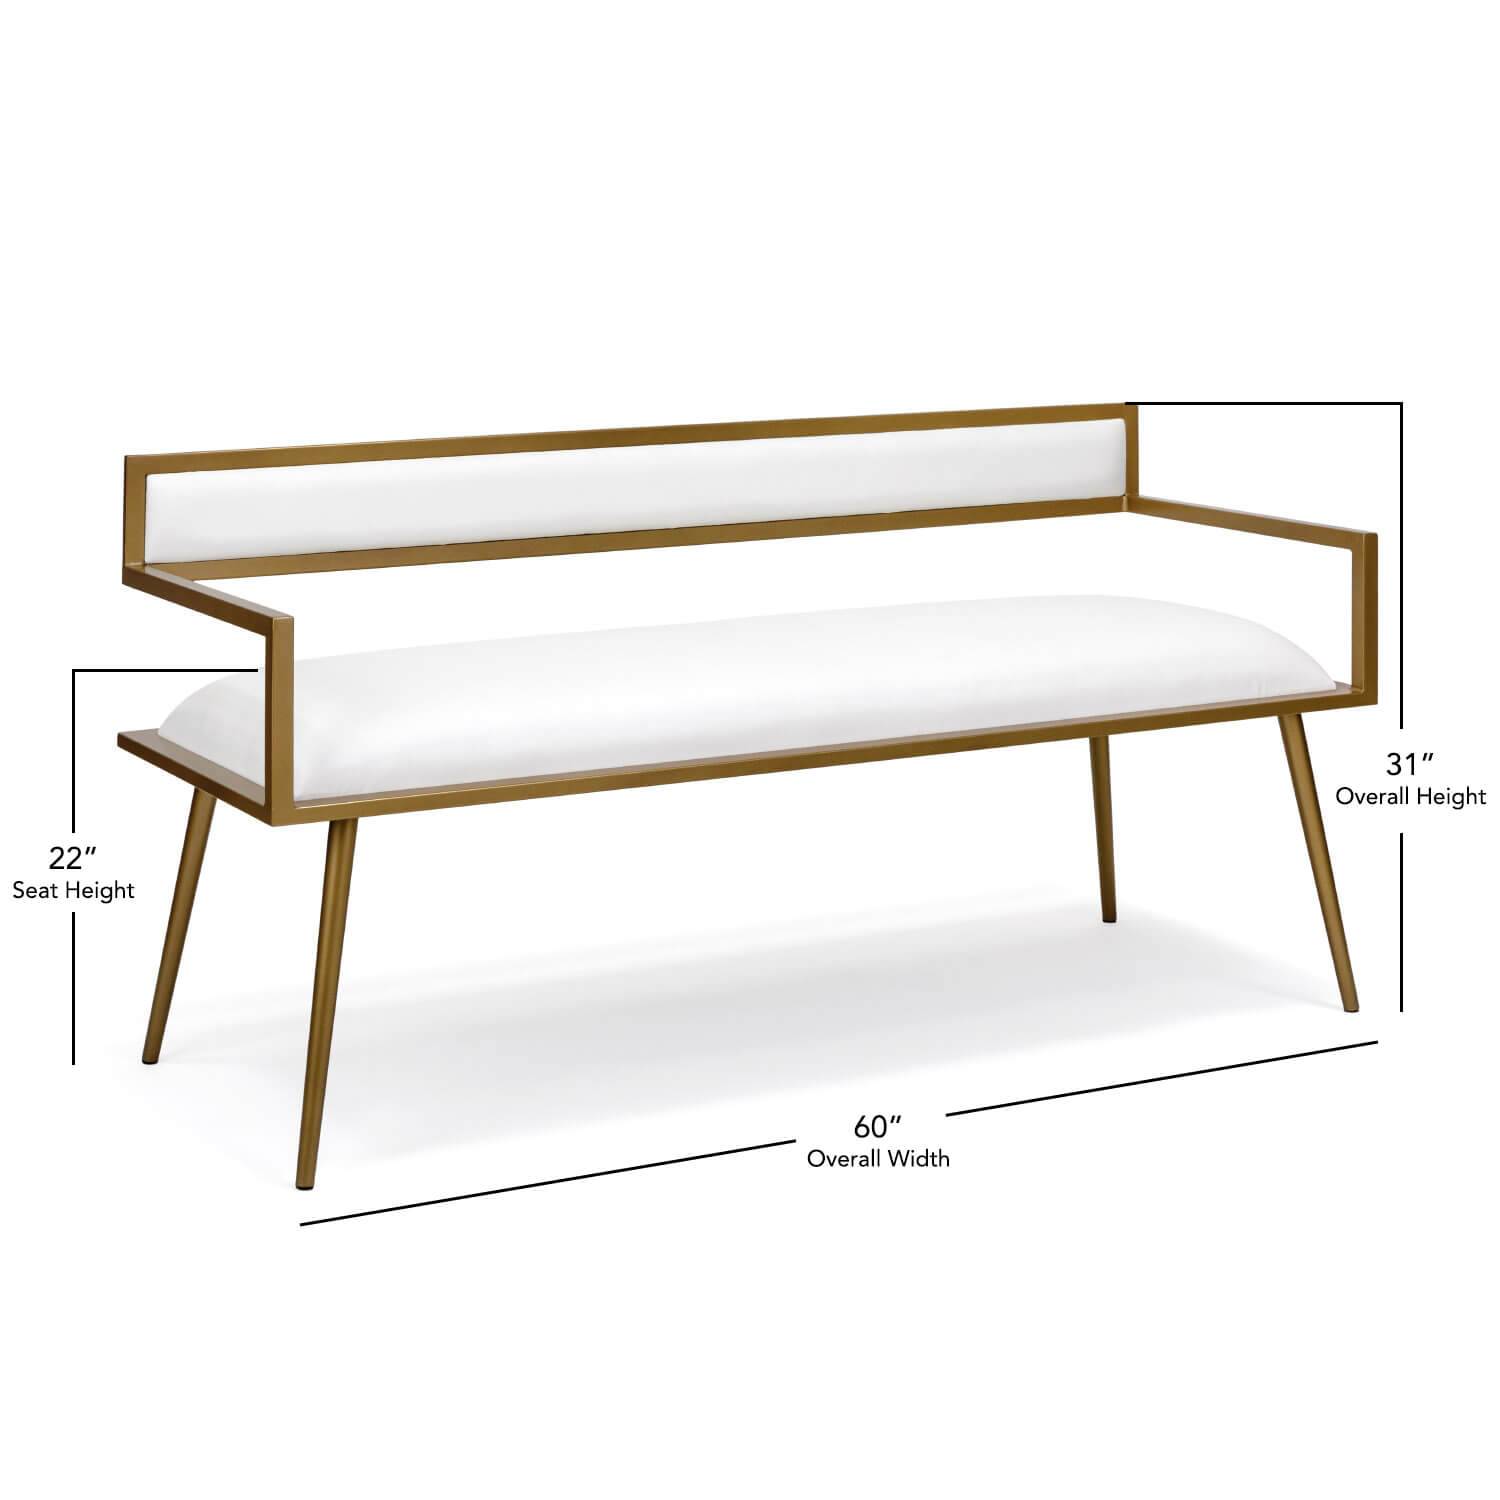 Zara 60-inch Mid Century Modern Upholstered Bench with Arms